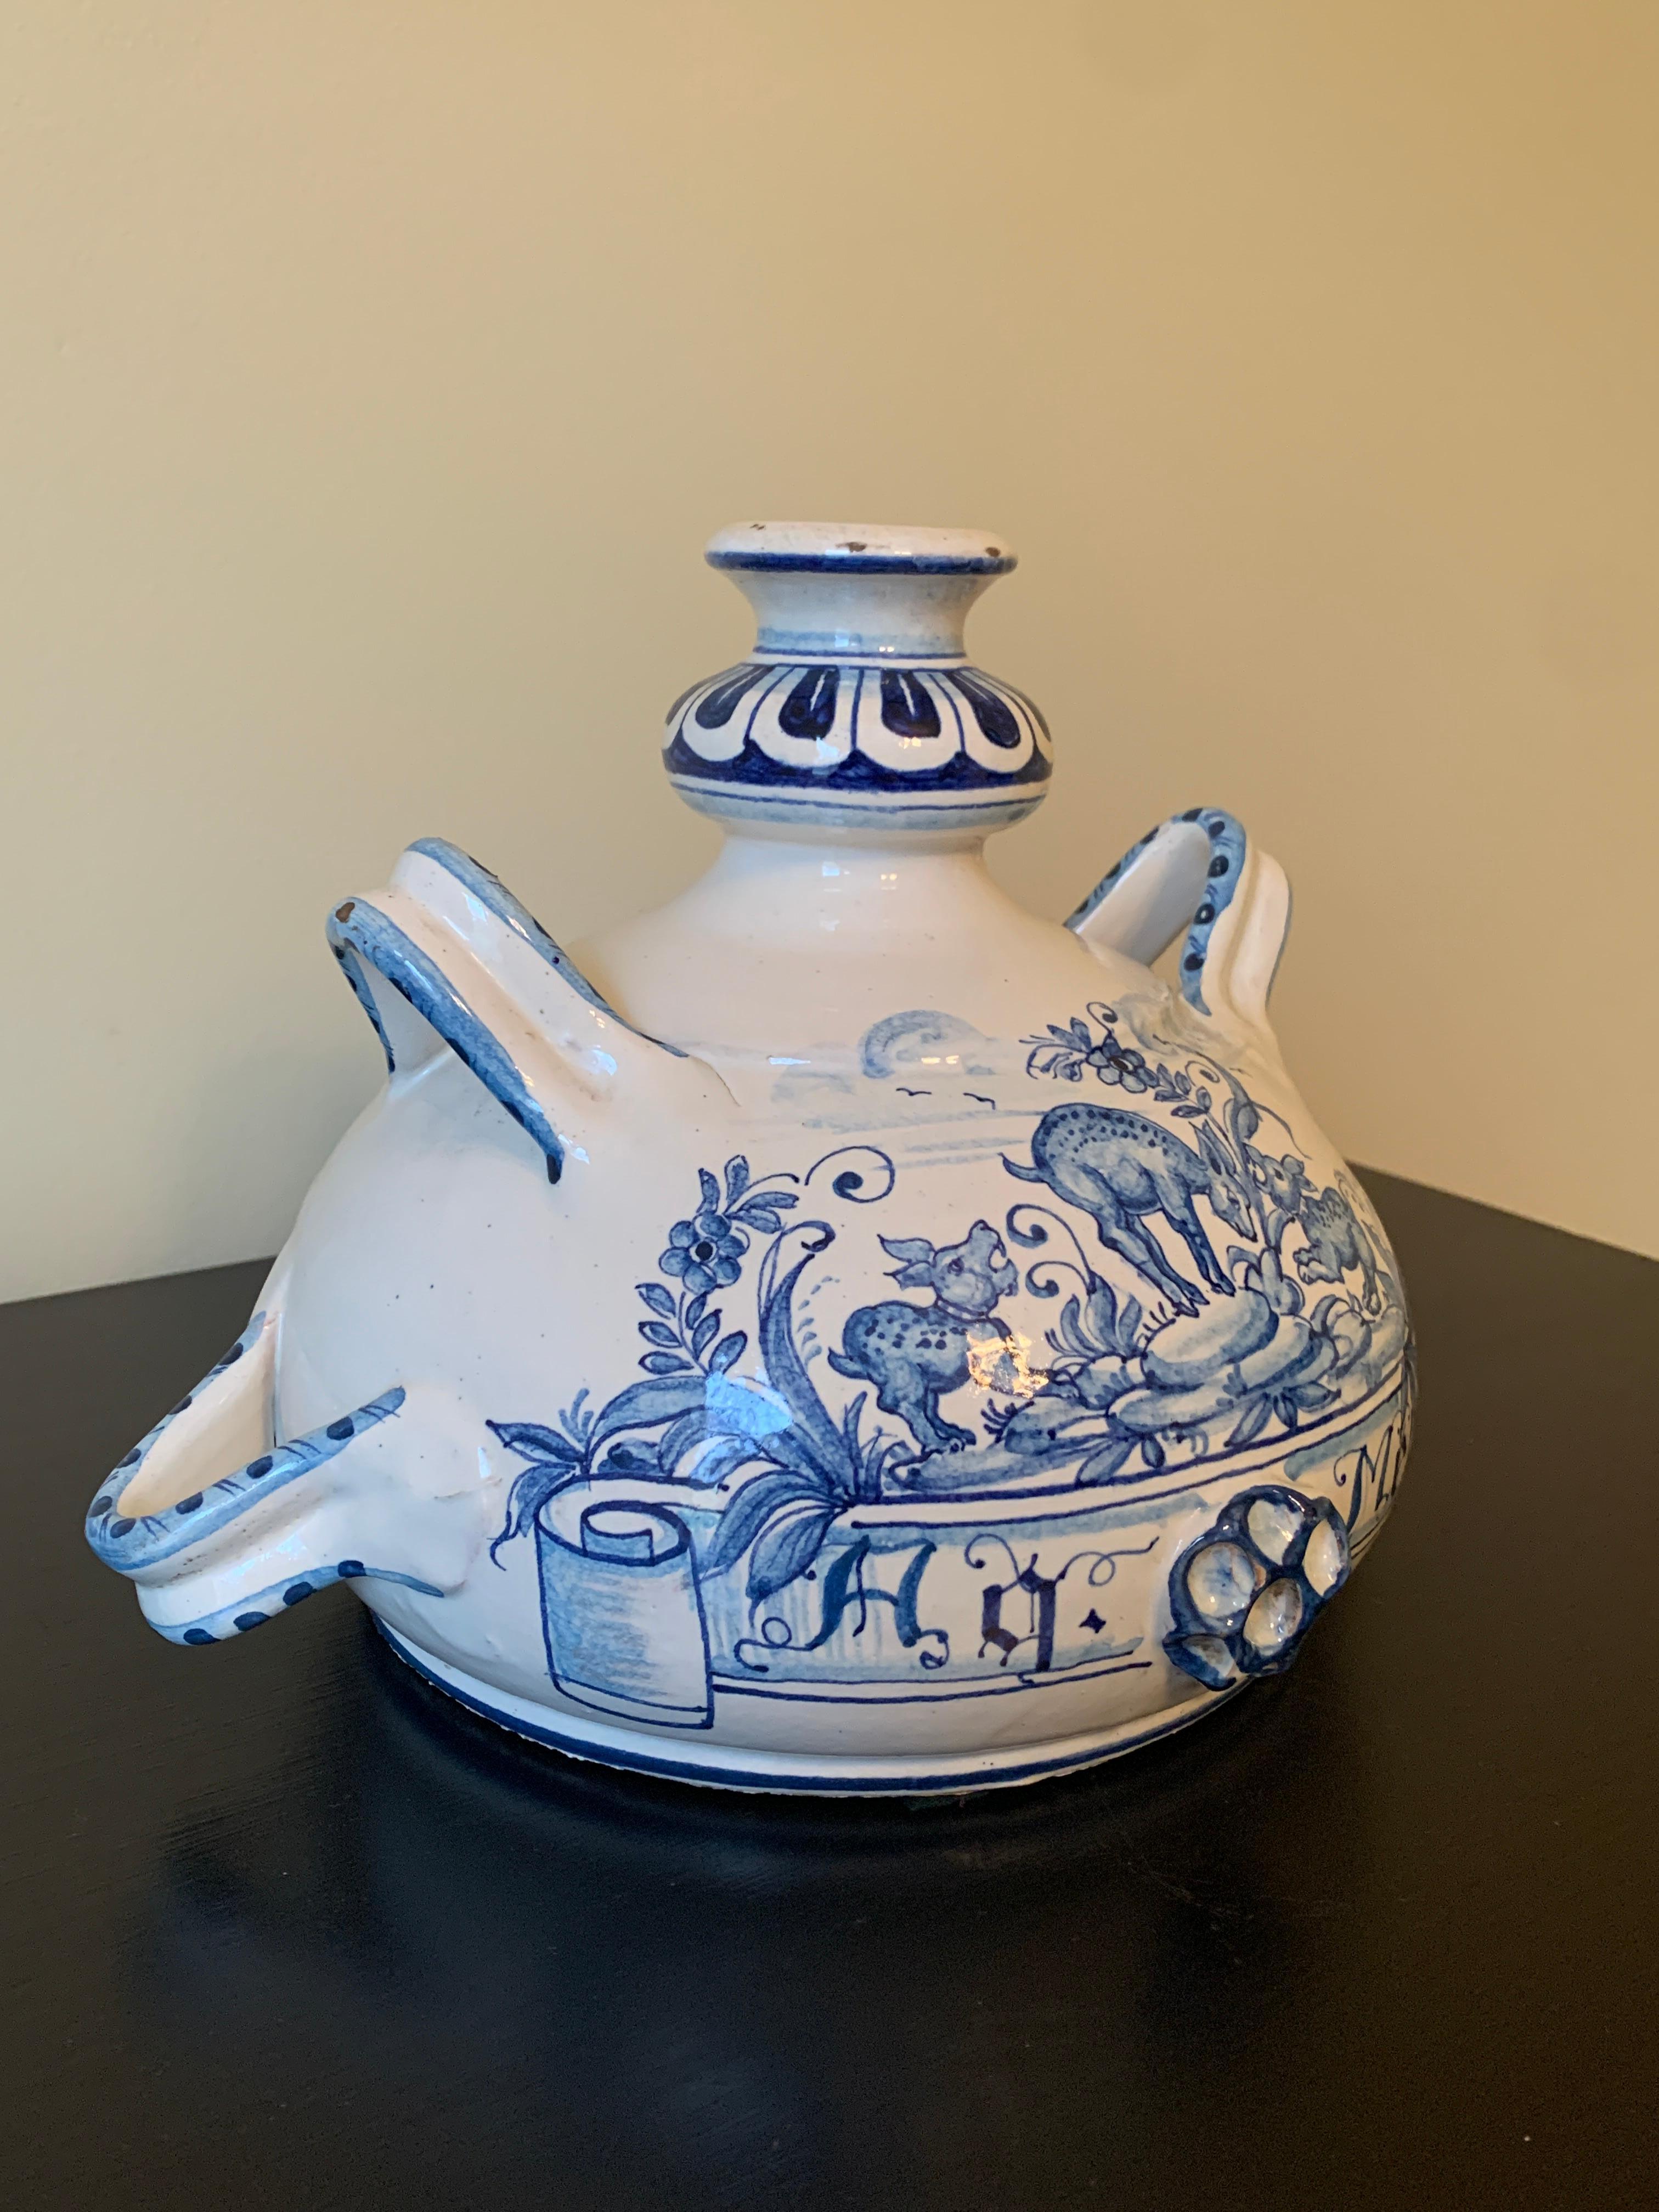 Vintage Italian Hand Painted Blue and White Faience Pottery Jug Vase In Good Condition For Sale In Elkhart, IN